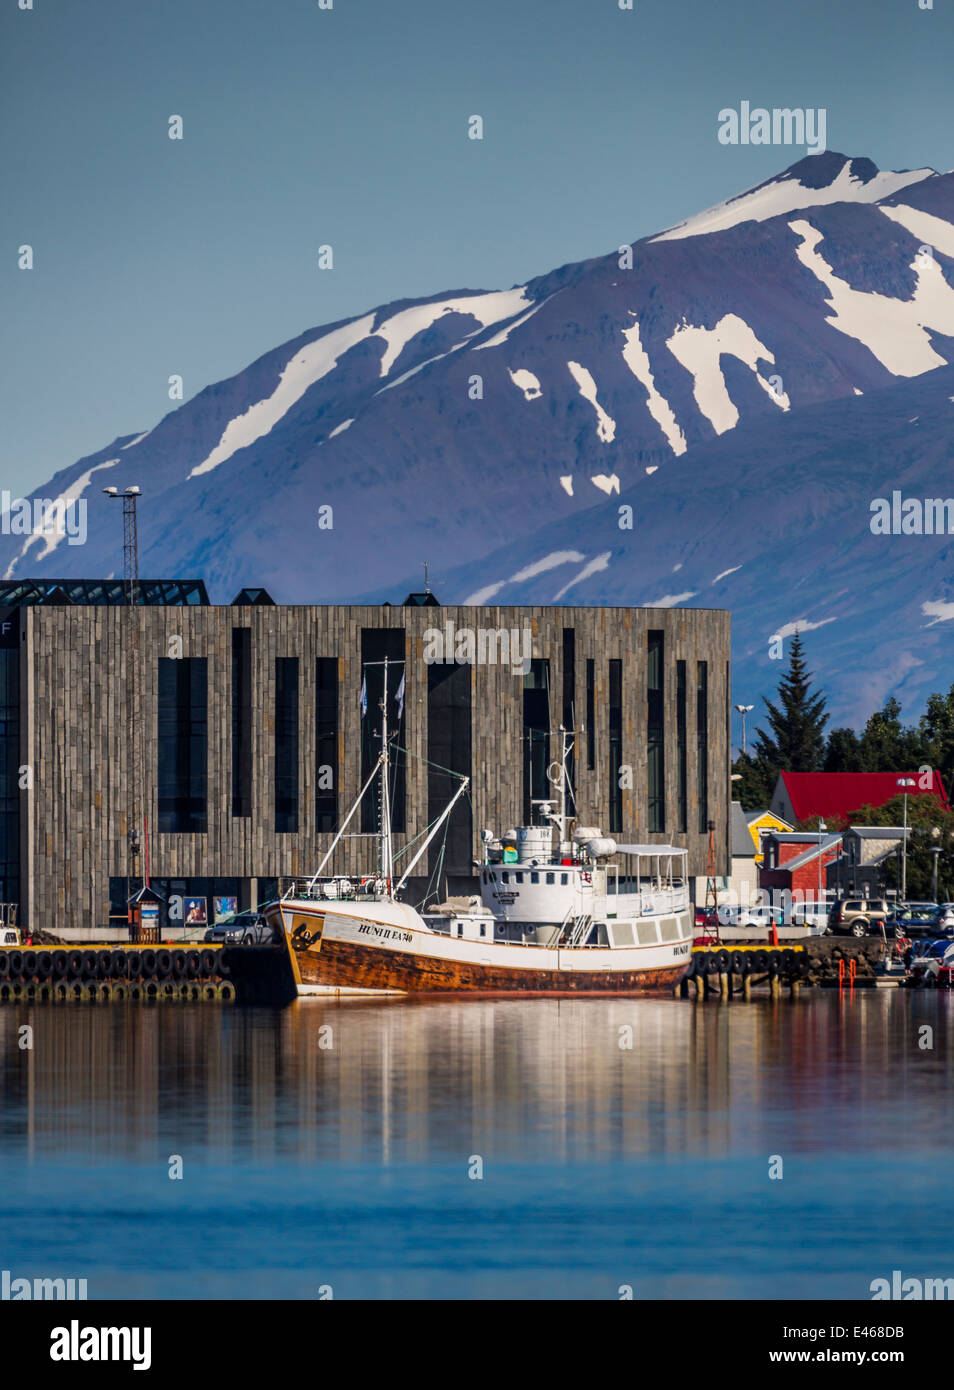 Boat and Hof Cultural House, Akureyri, Iceland Stock Photo